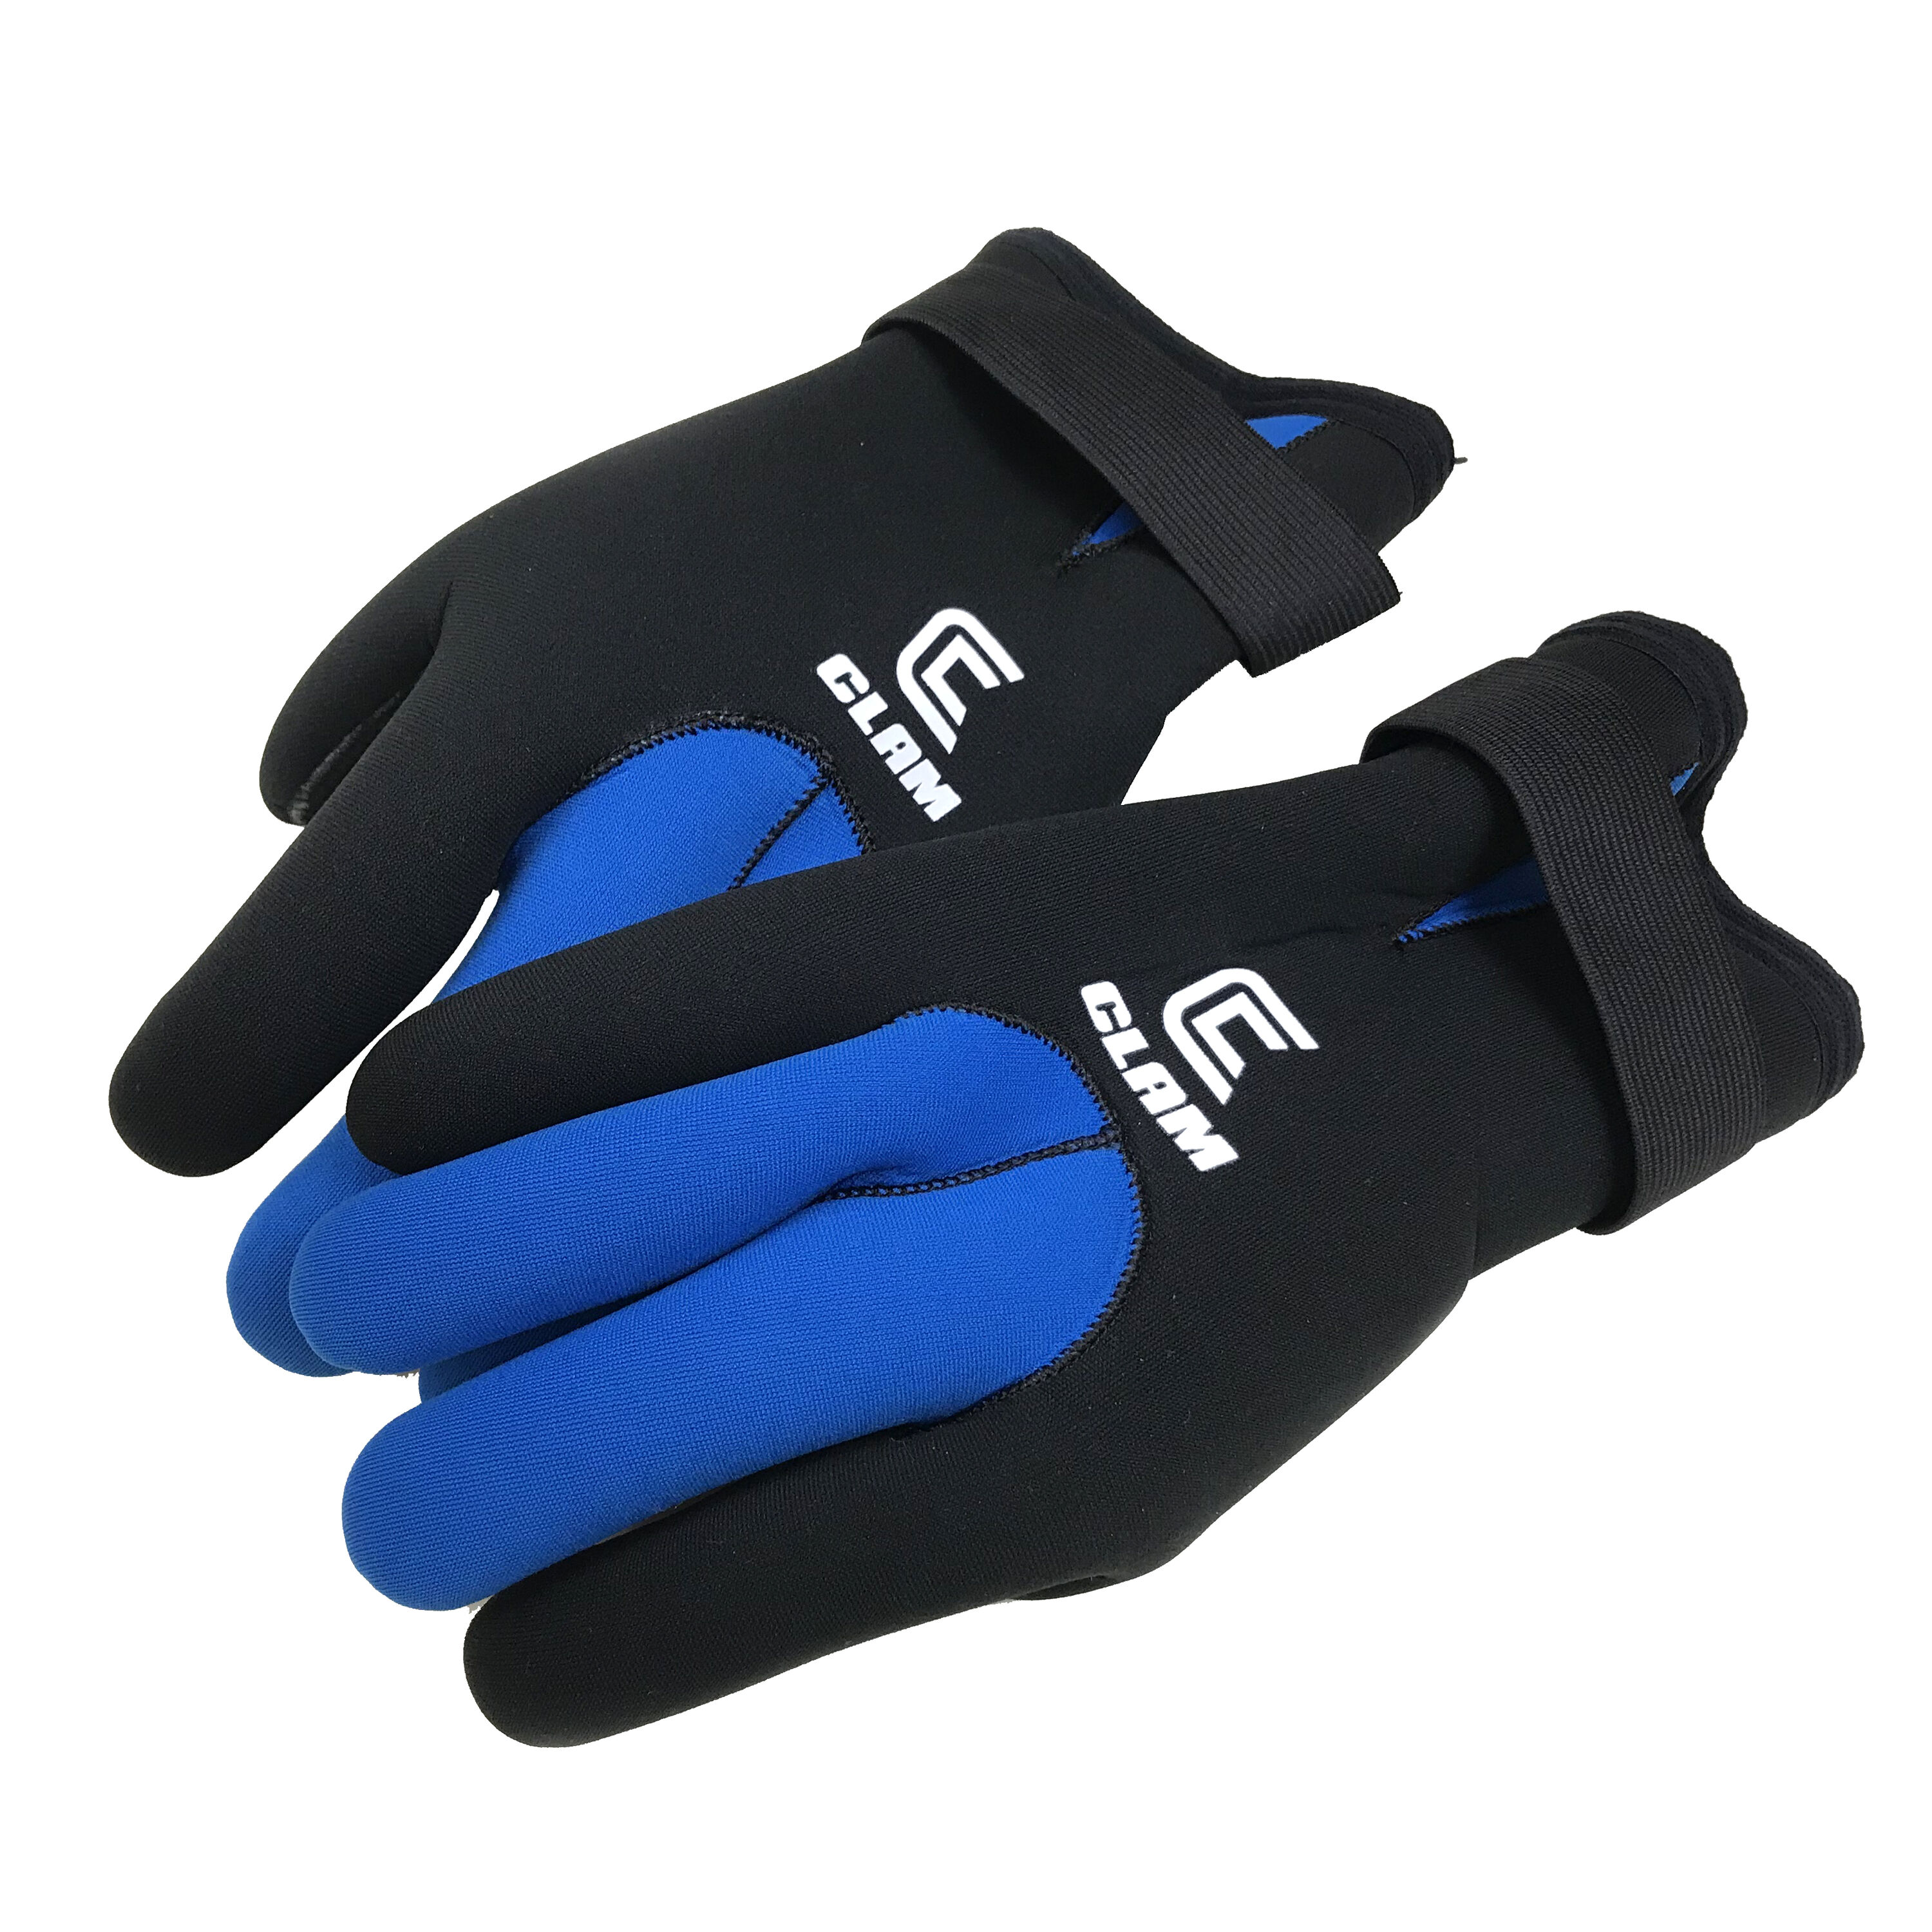 Clam Outdoors Edge Men's Ice Fishing Gloves - Adult Medium, Black,  Waterproof/Breathable, Durable Polyurethane Palm, 3-Year Warranty in the  Fishing Gear & Apparel department at